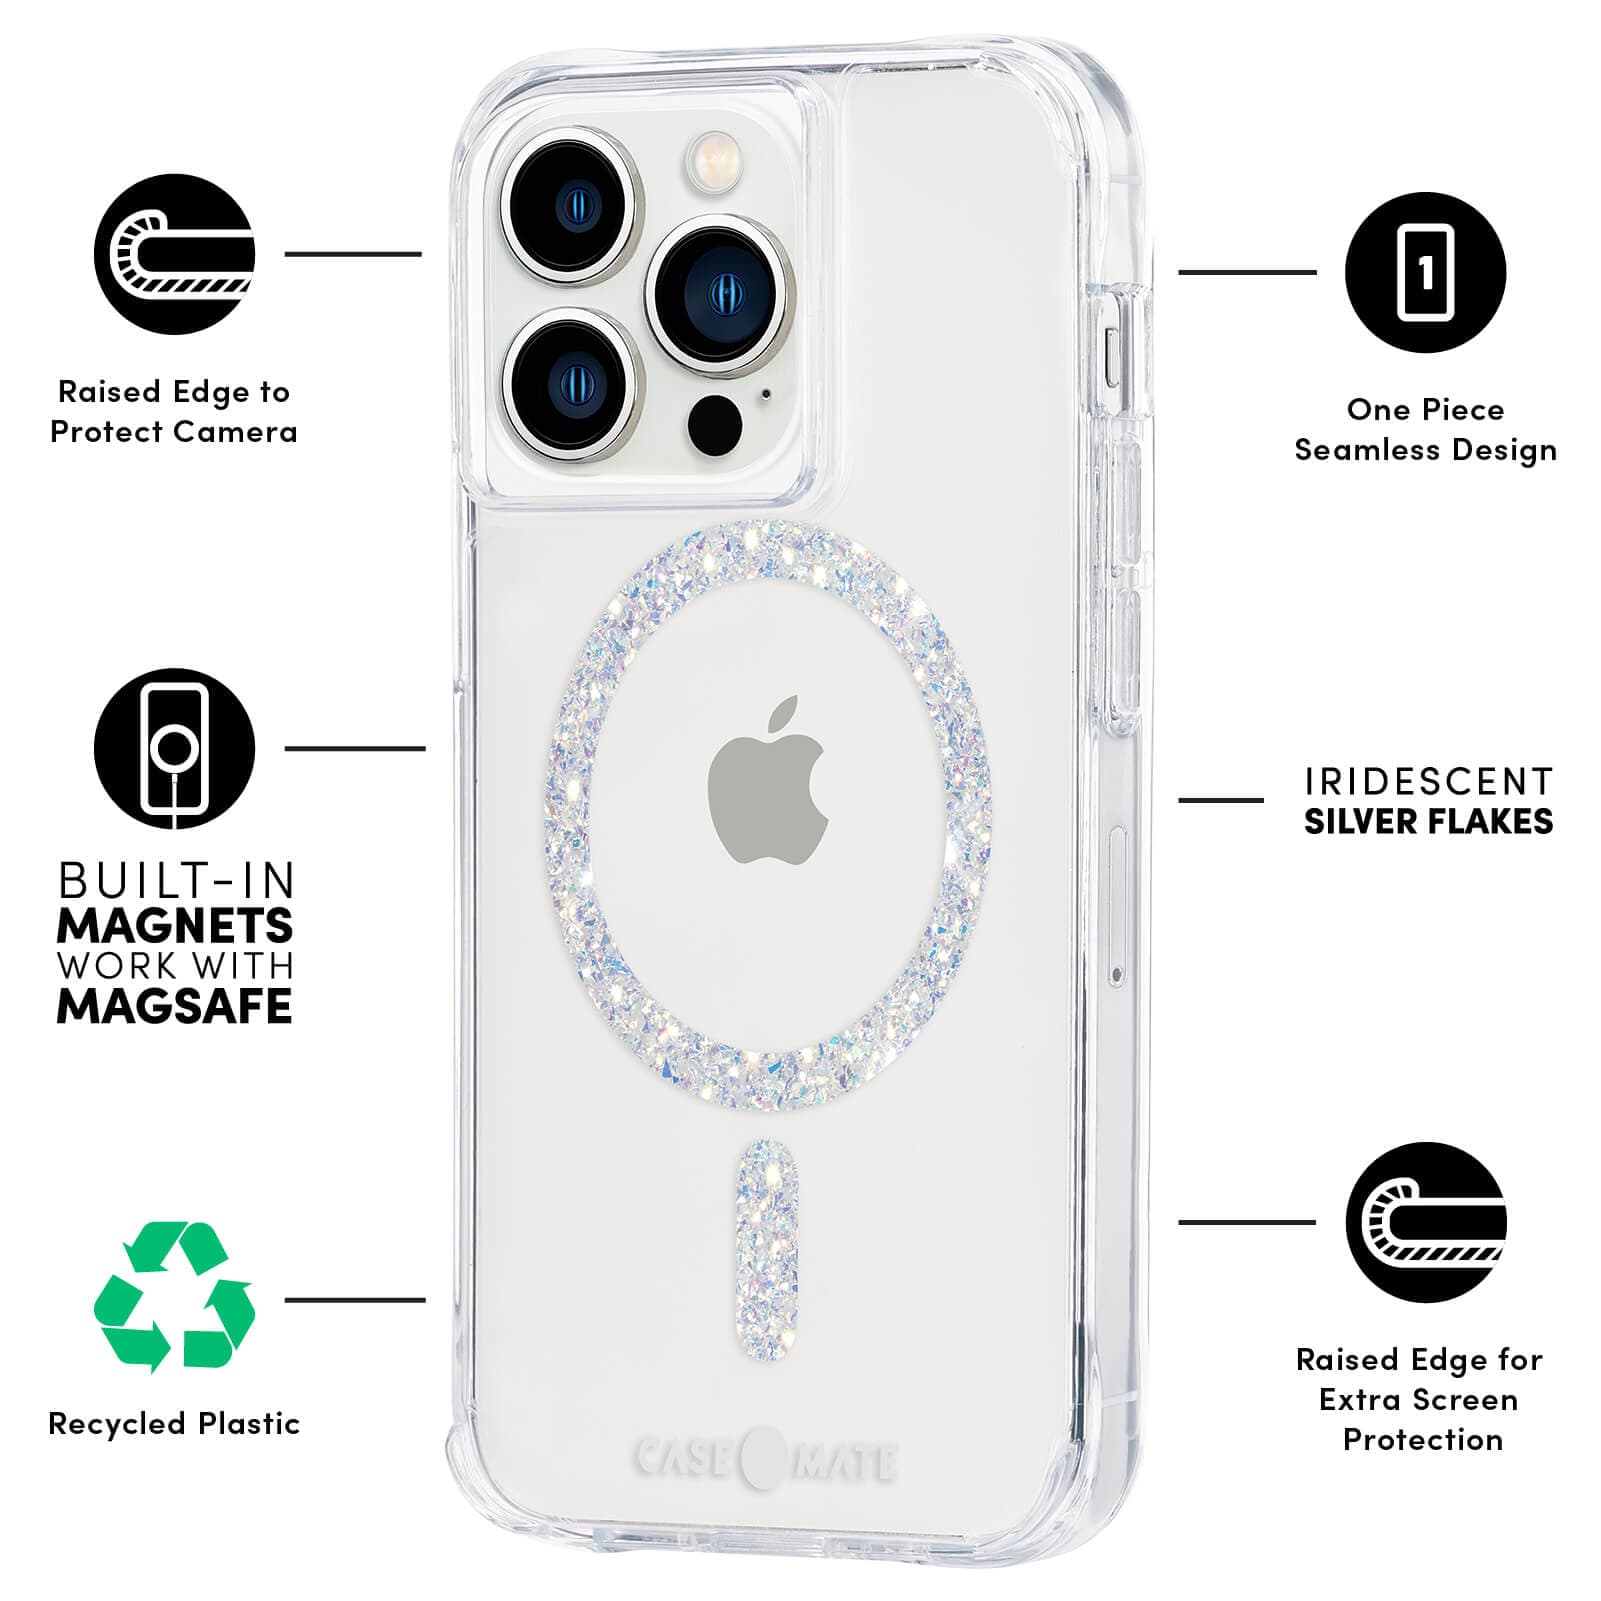 FEATURES: RAISED EDGE TO PROTECT CAMERA, BUILT IN MAGNETS WORK WITH MAGSAFE, RECYCLED PLASTIC, ONE PIECE SEAMLESS DESIGN, IRIDESCENT SILVER FLAKES, RAISED EDGE FOR EXTRA SCREEN PROTECTION. COLOR::TWINKLE STARDUST